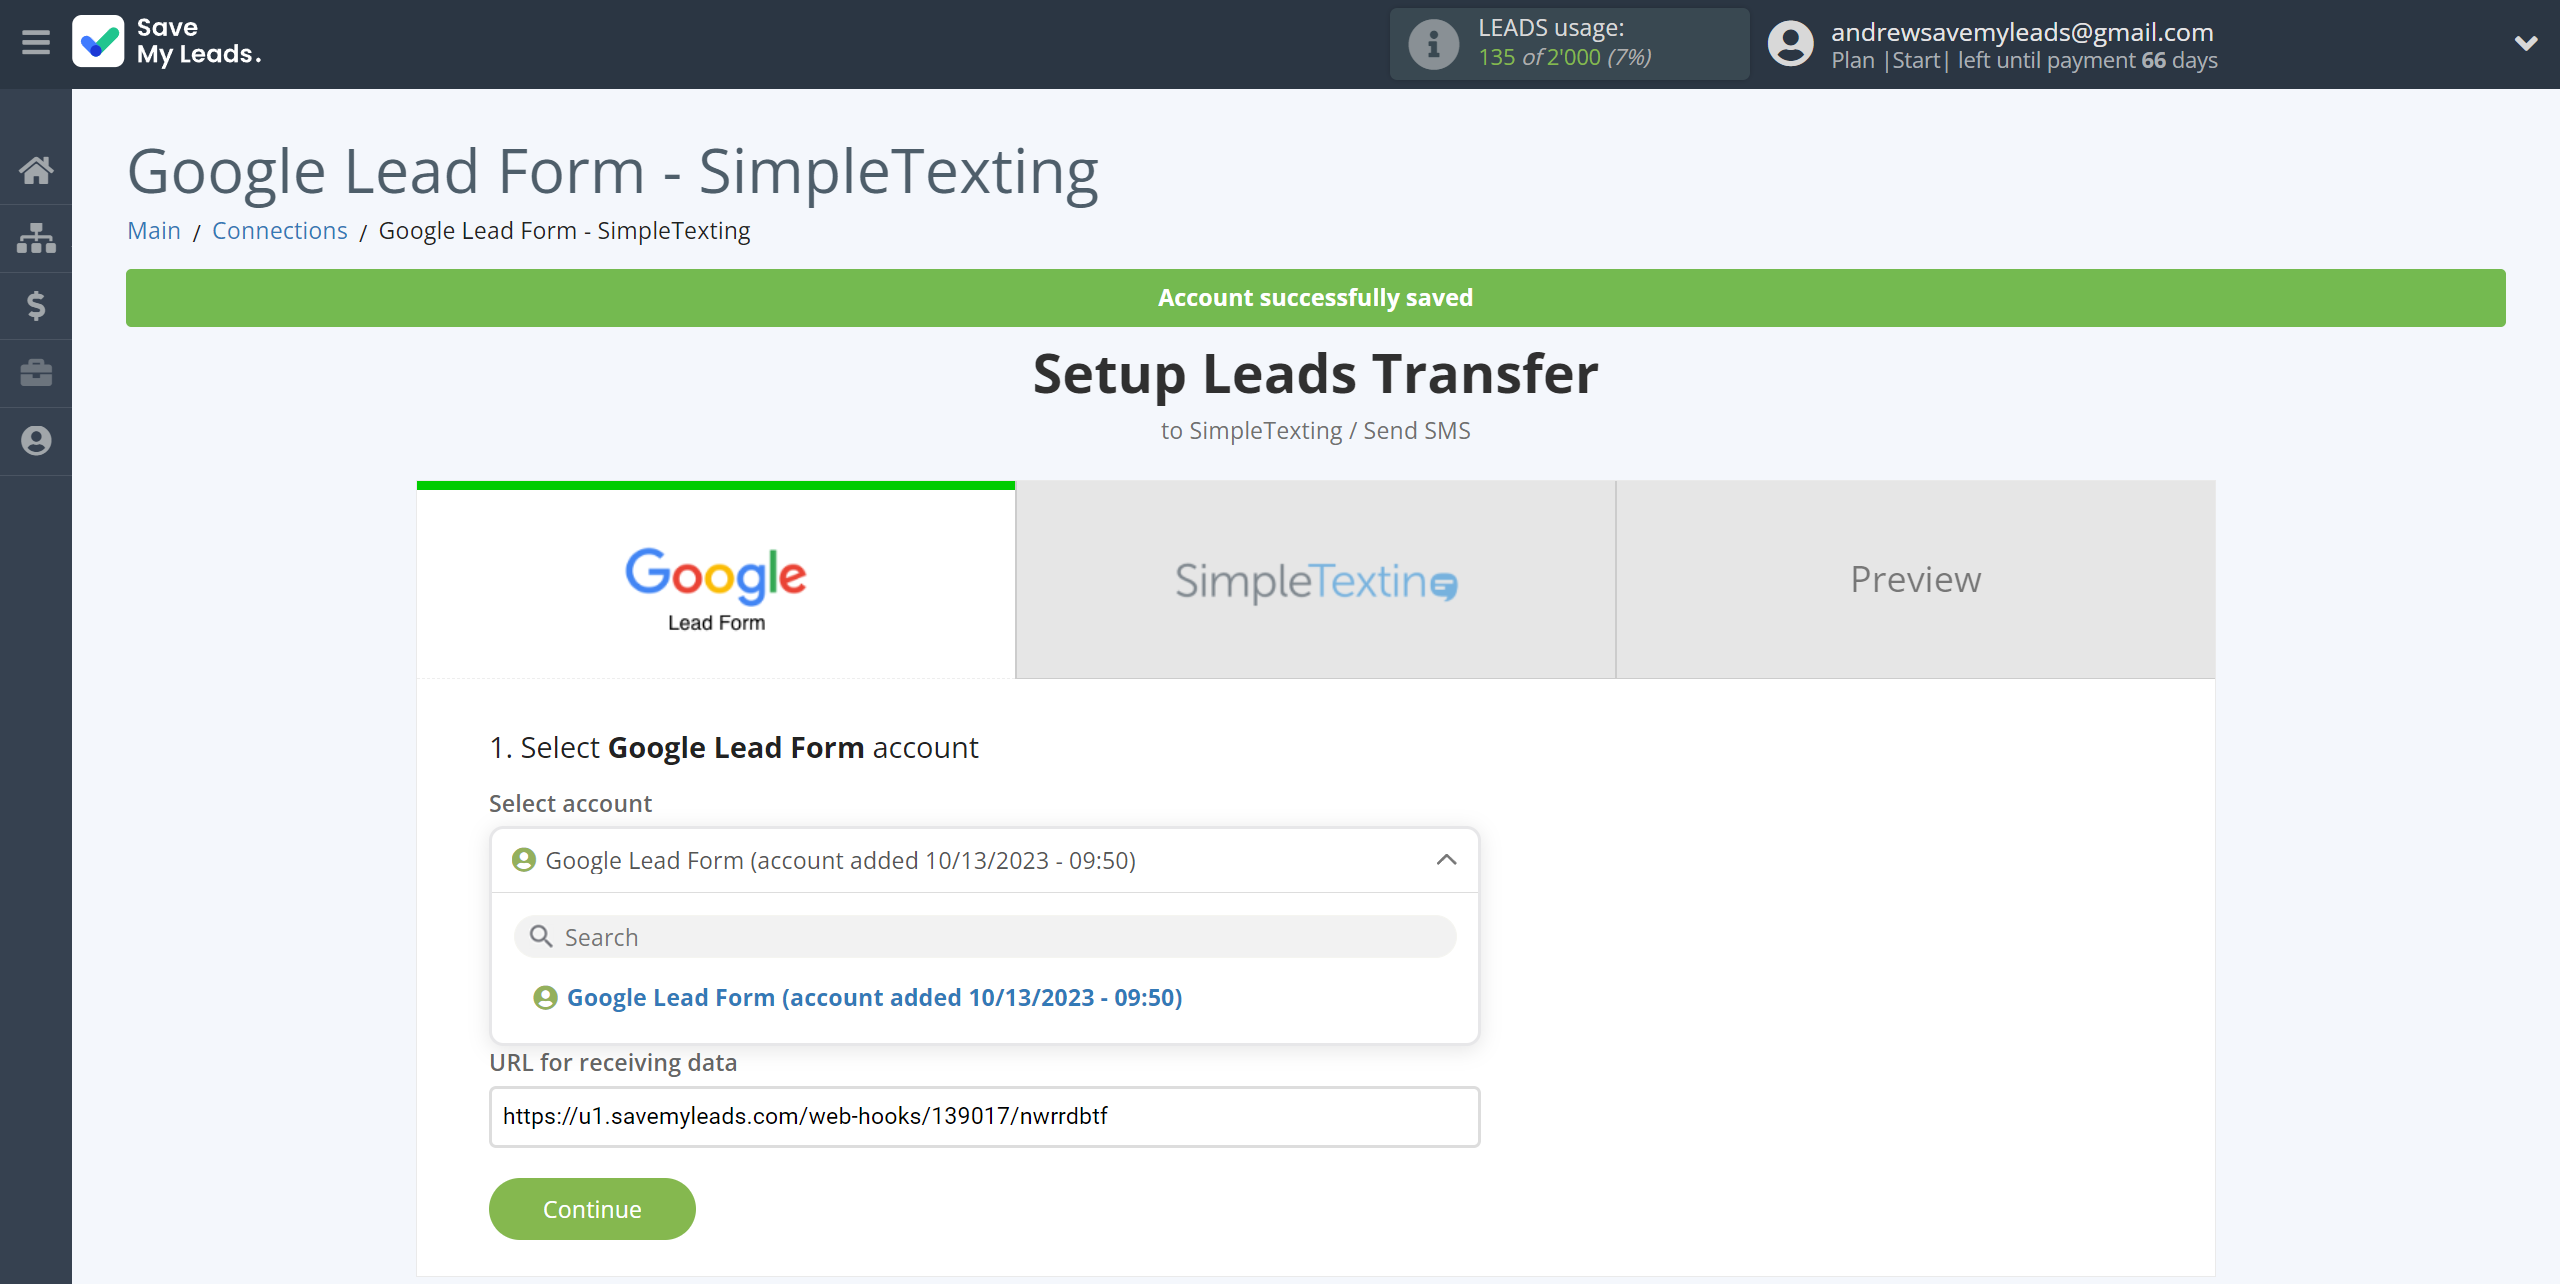 How to Connect Google Lead Form with SimpleTexting | Data Source account selection